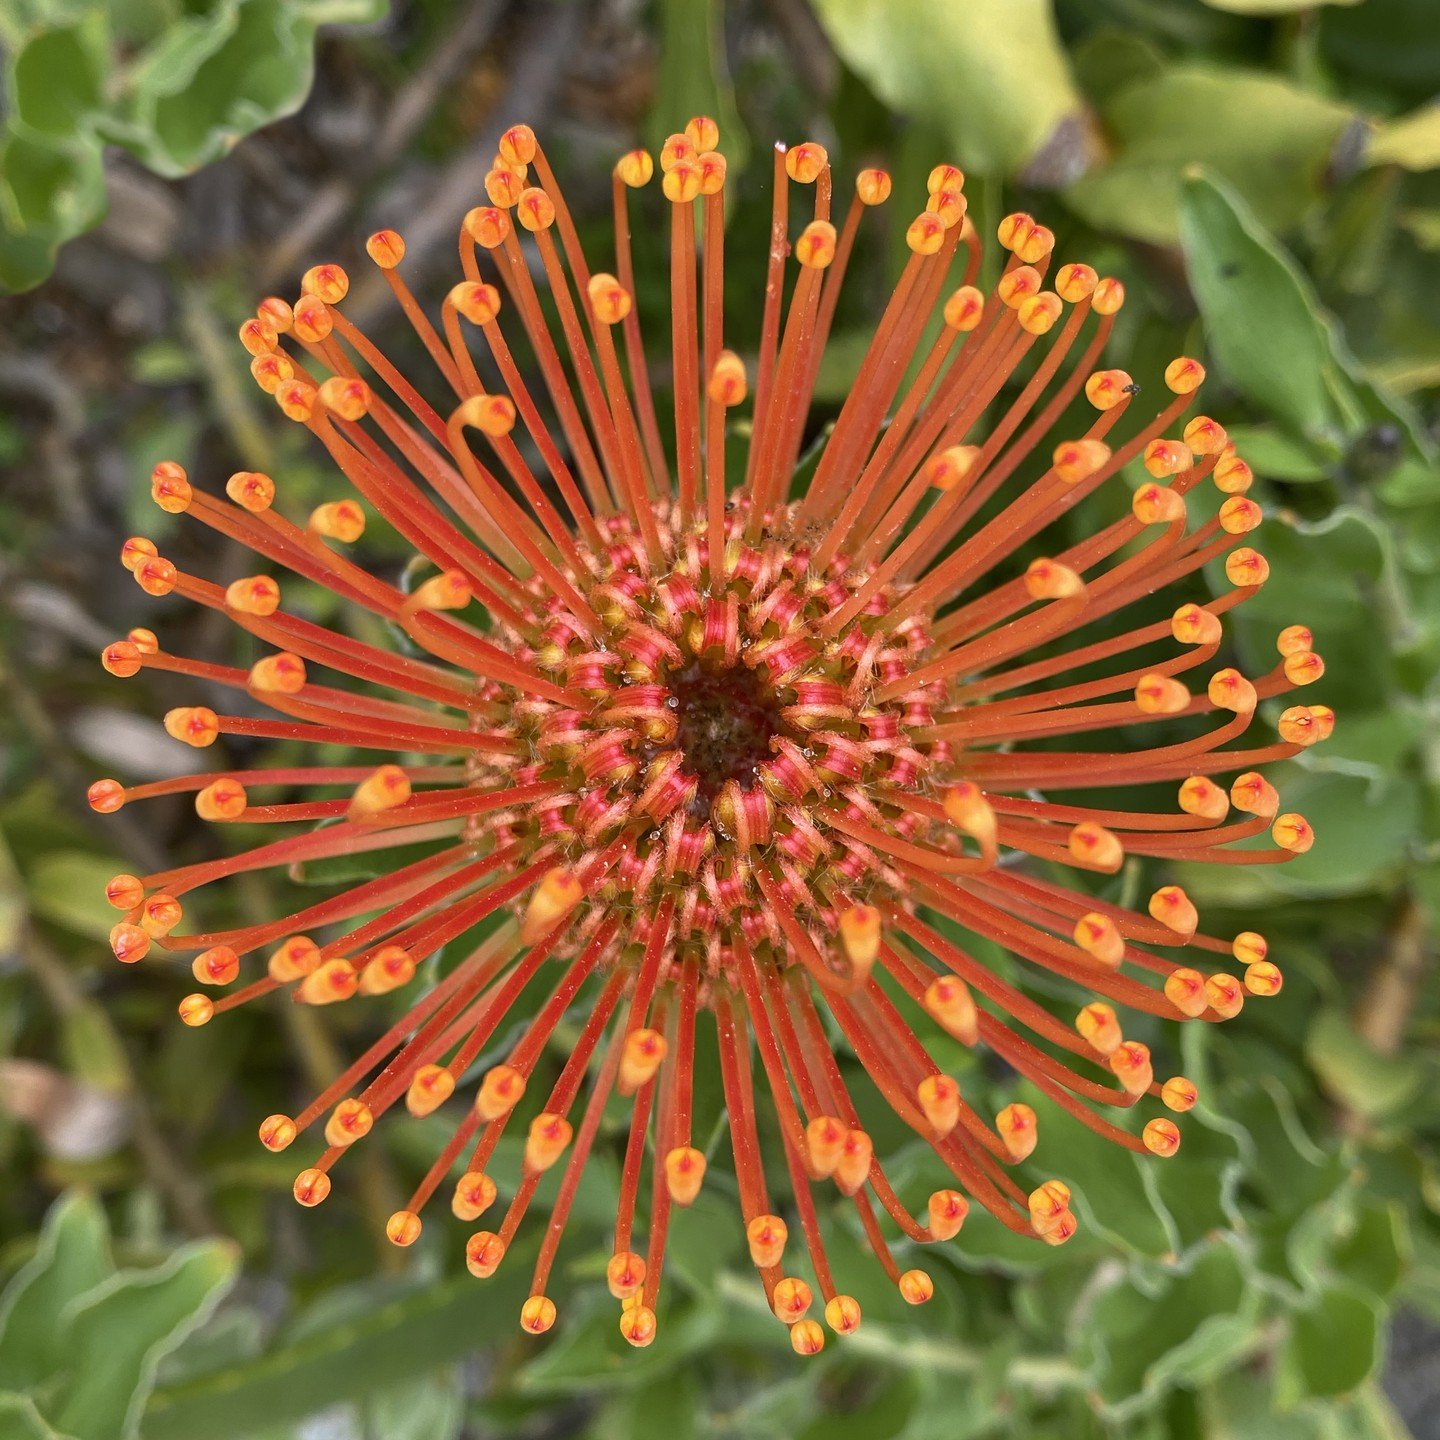 Leucospermum cordifolium, or 'Flame Giant,' is a Pincushion flower in the Protea family that graces Taft Gardens in the Spring. Its large, showy blooms are remarkably plastic-like to the touch. And like many flower centers, seed heads, and pinecones,